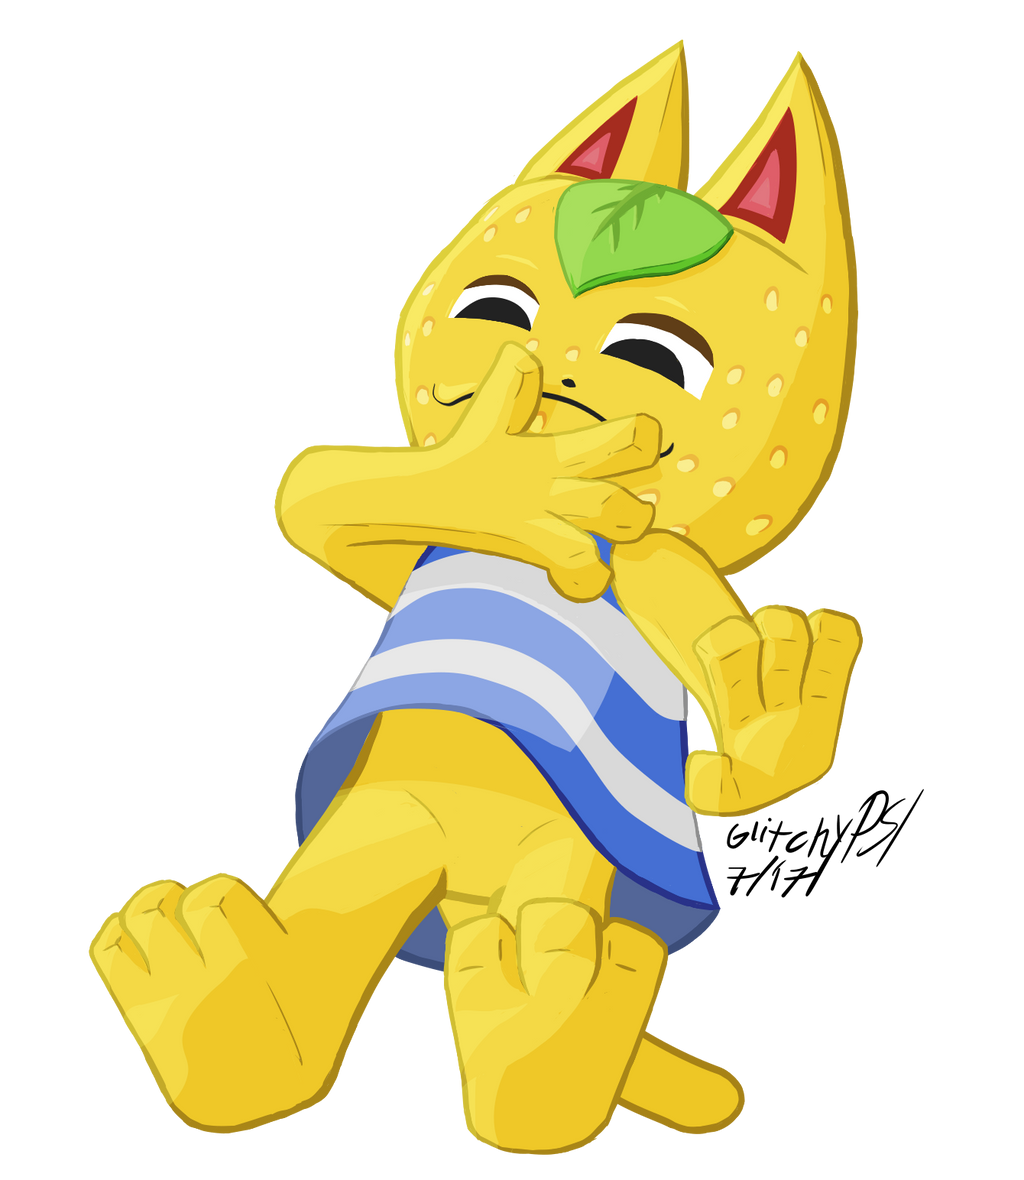 Tangy (Animal Crossing, my style) by GlitchyPSIX on DeviantArt